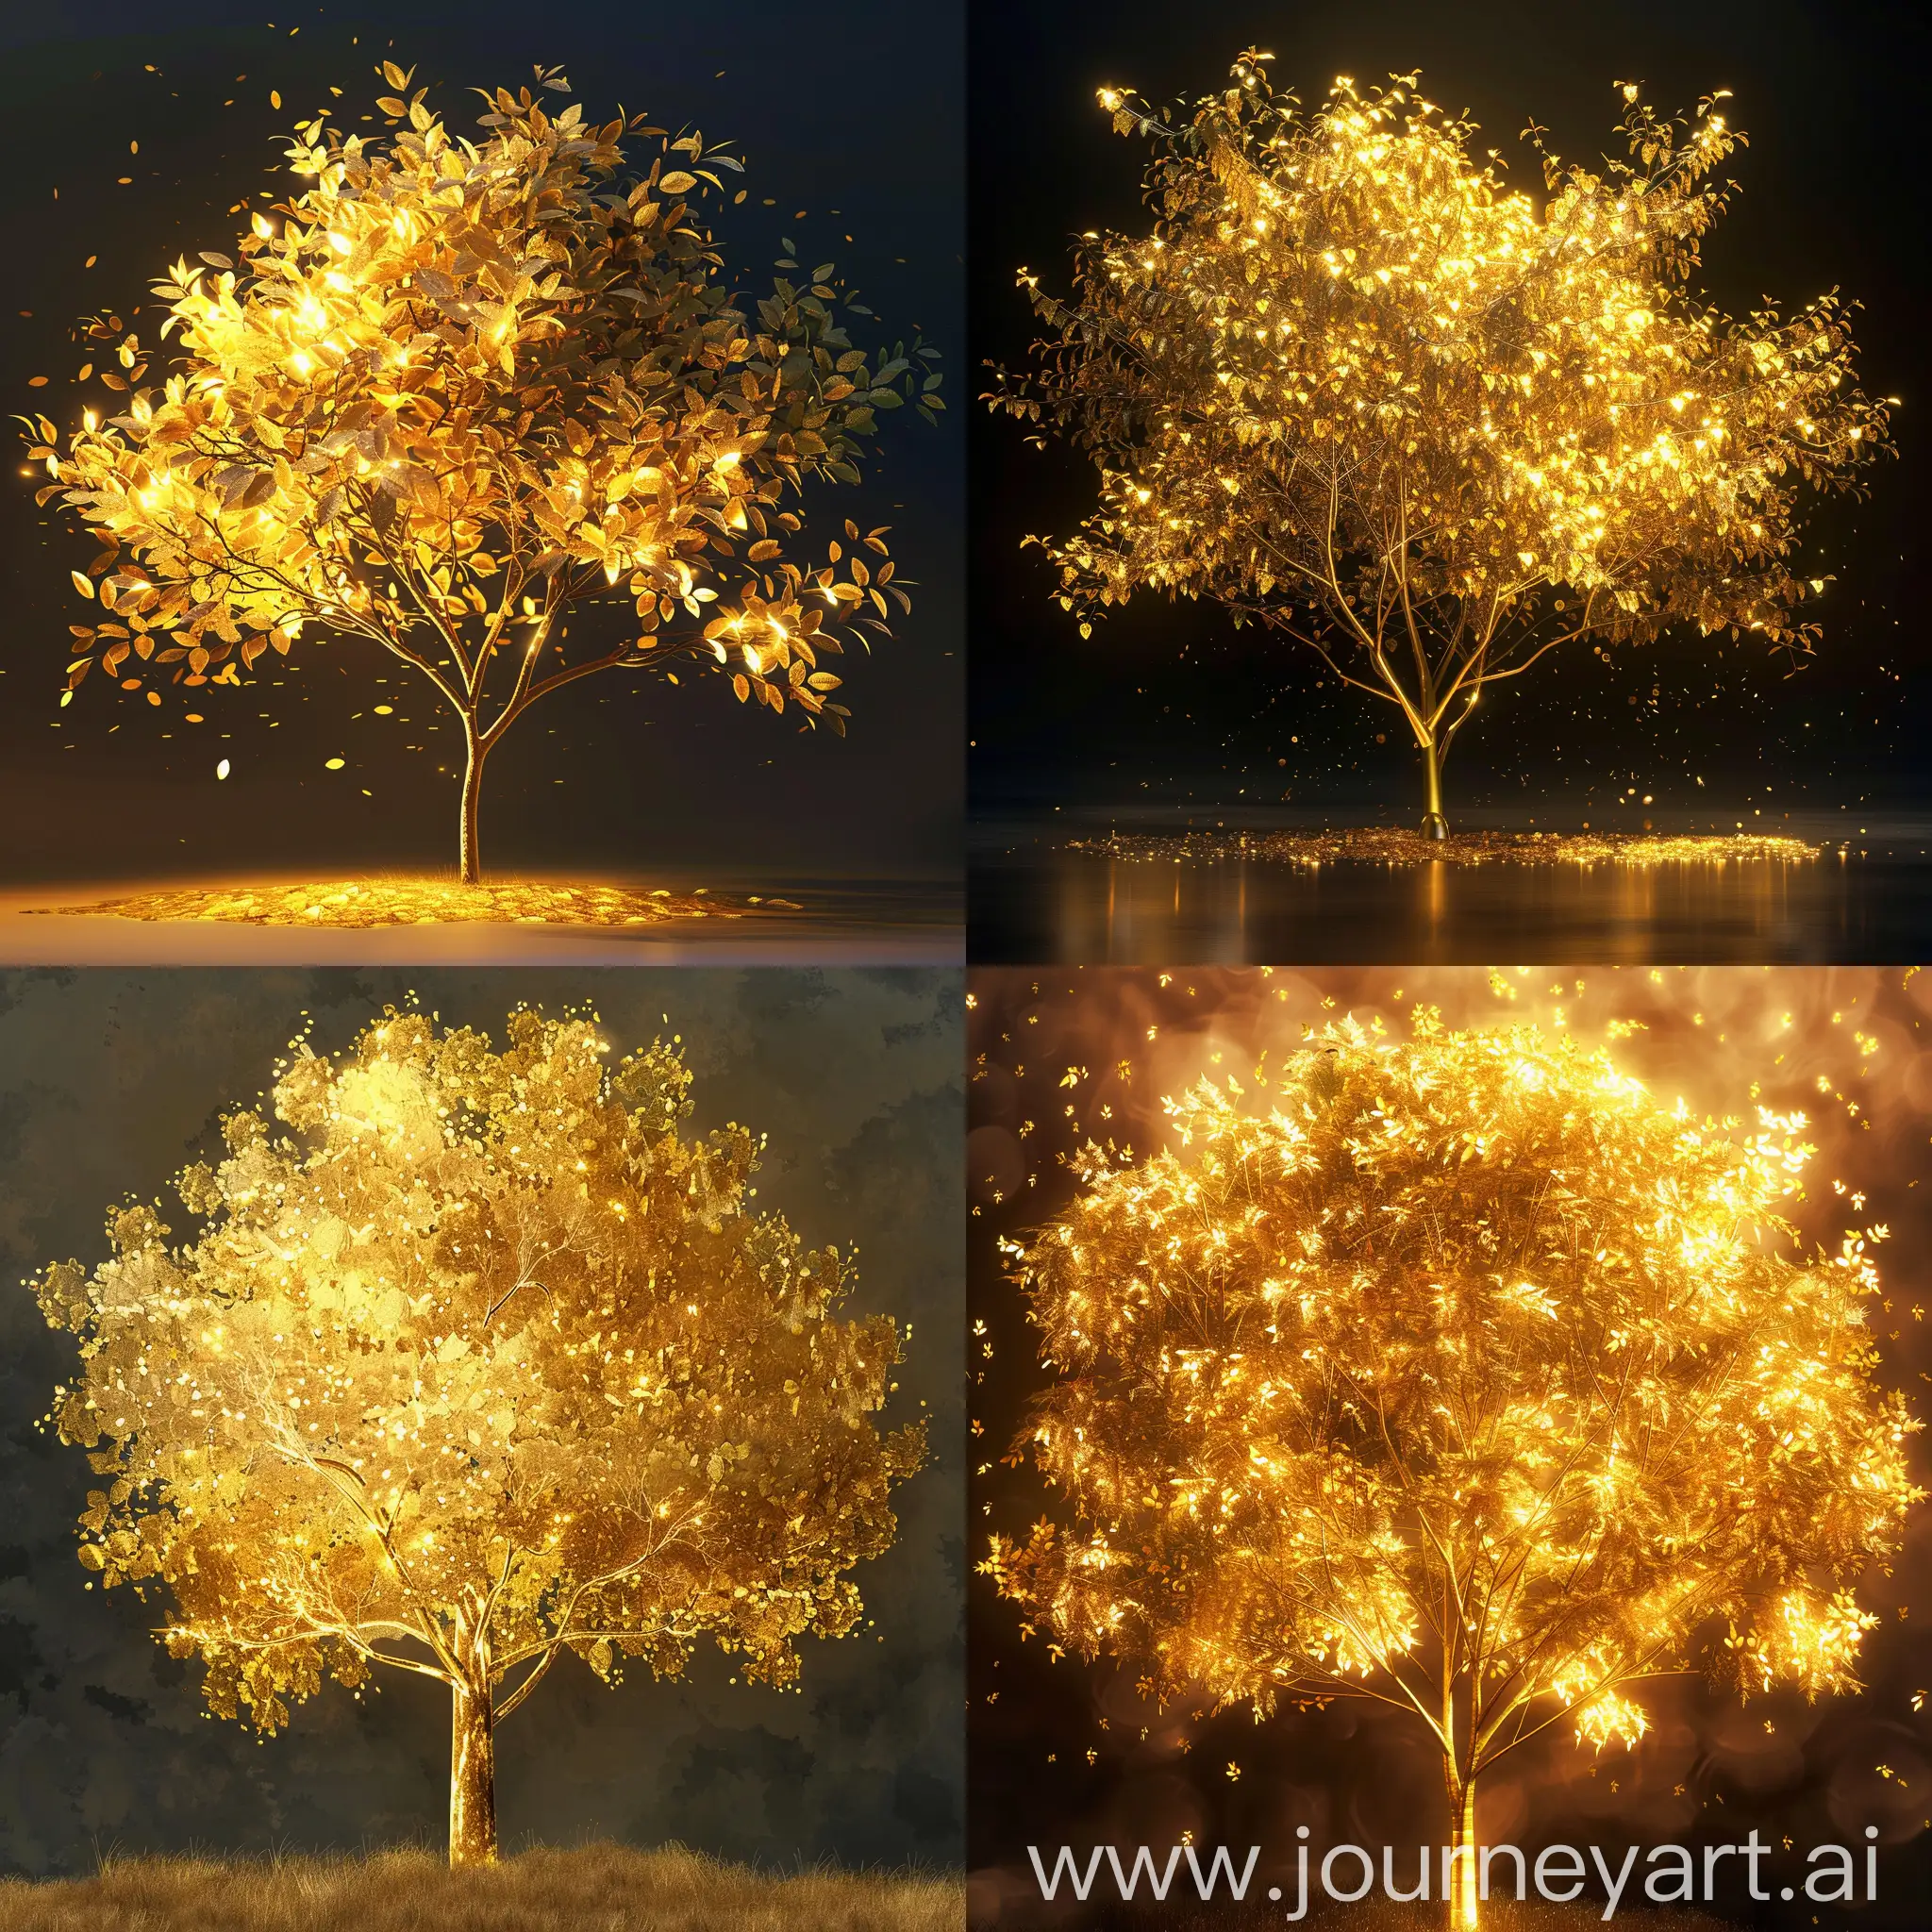 A golden tree, the leaves are all gold, golden light shines on this tree